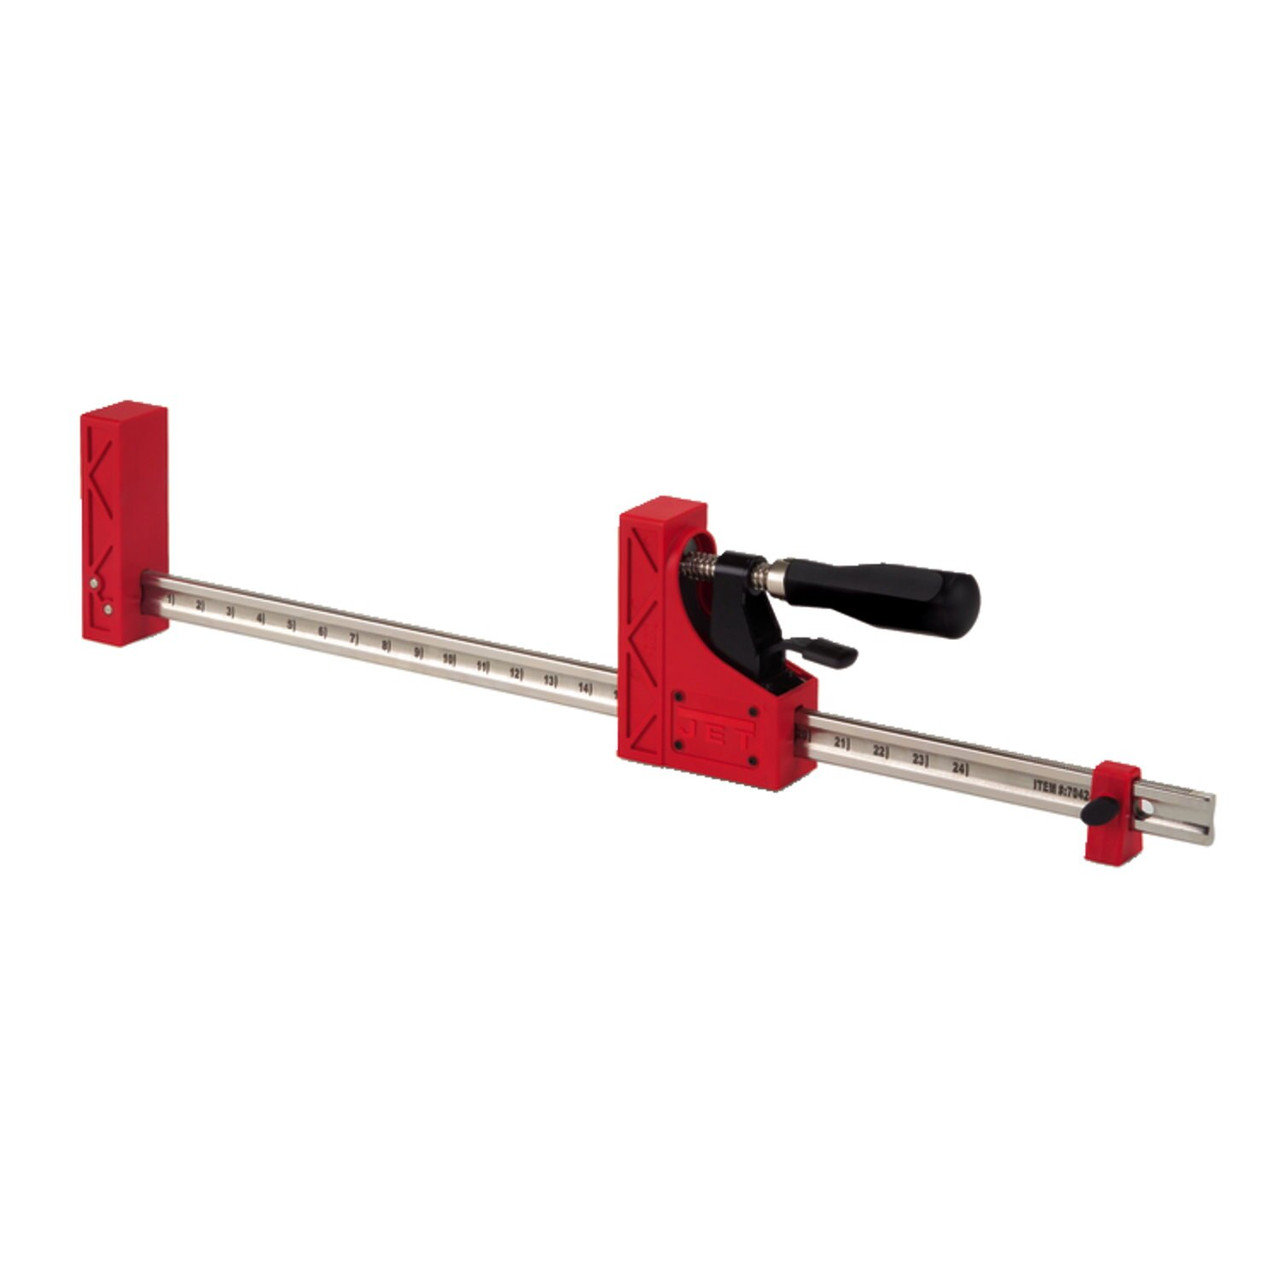 Jet, 24" Parallel Clamps, 2 Pack